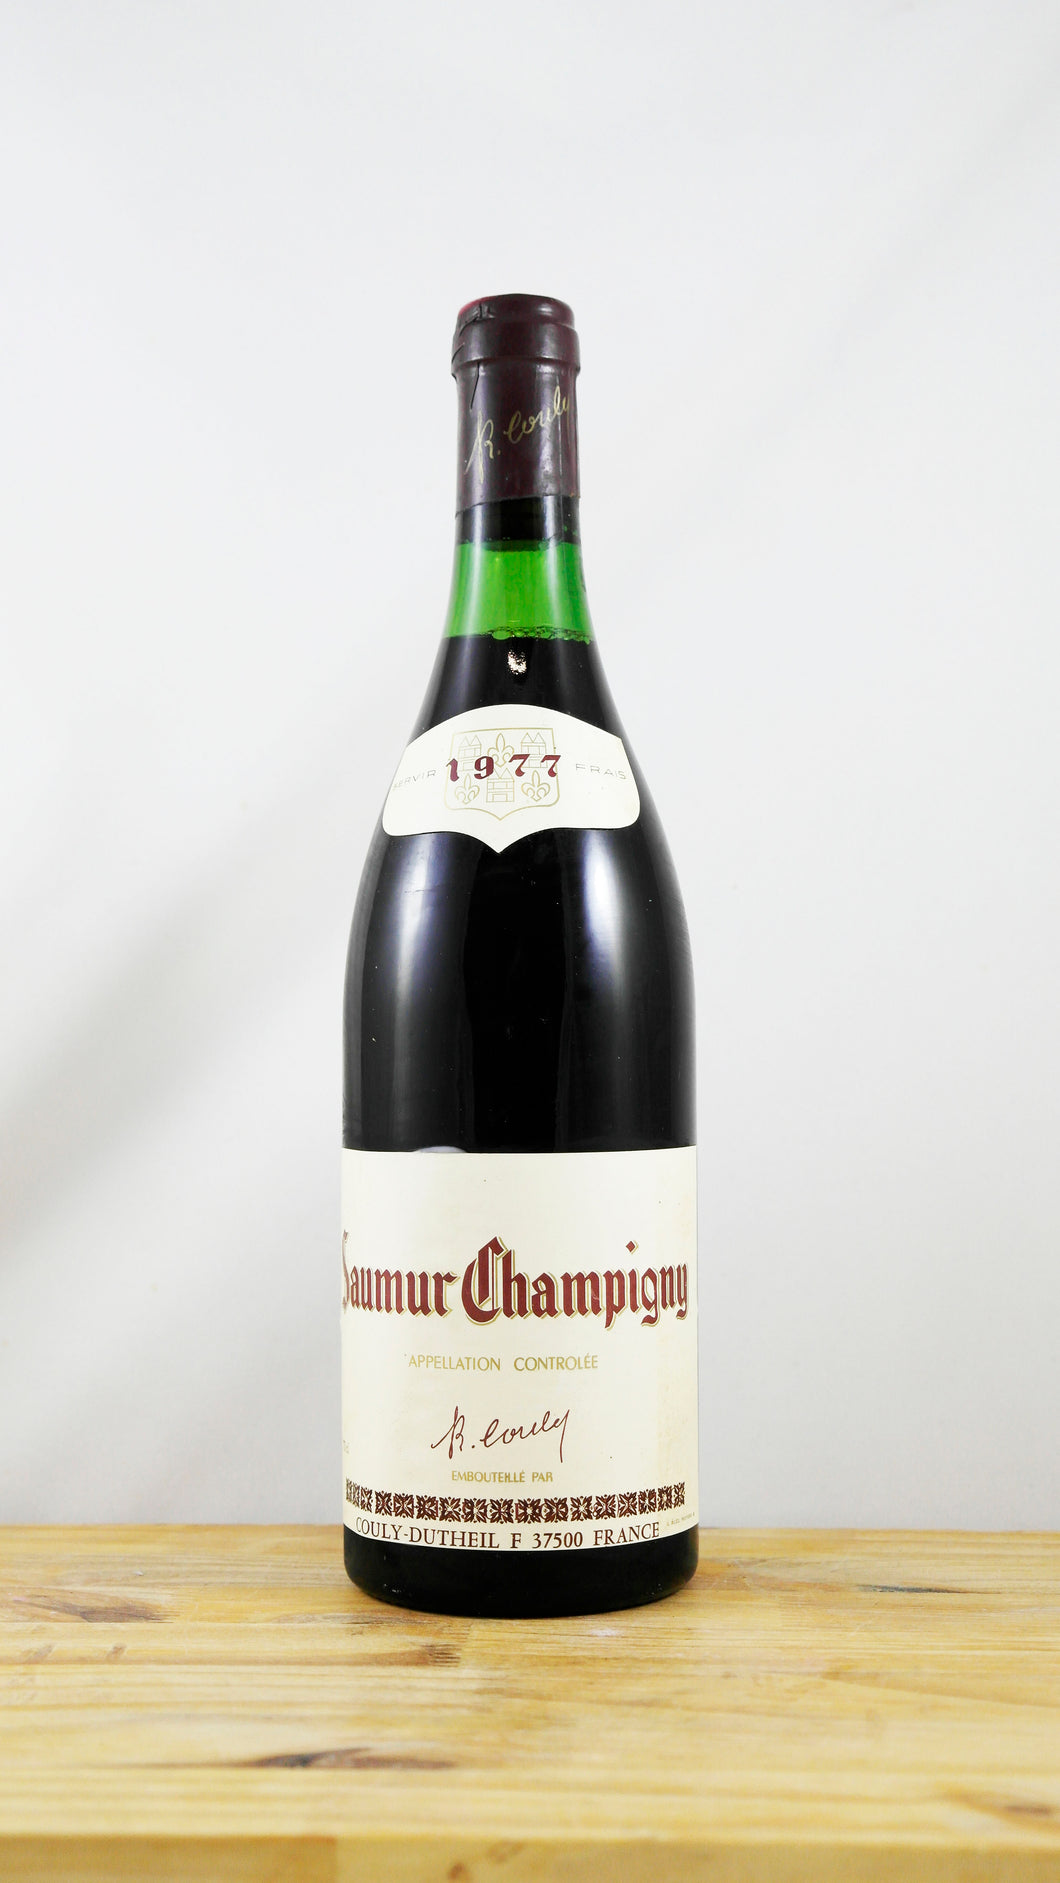 Vin Année 1977 R. Couly